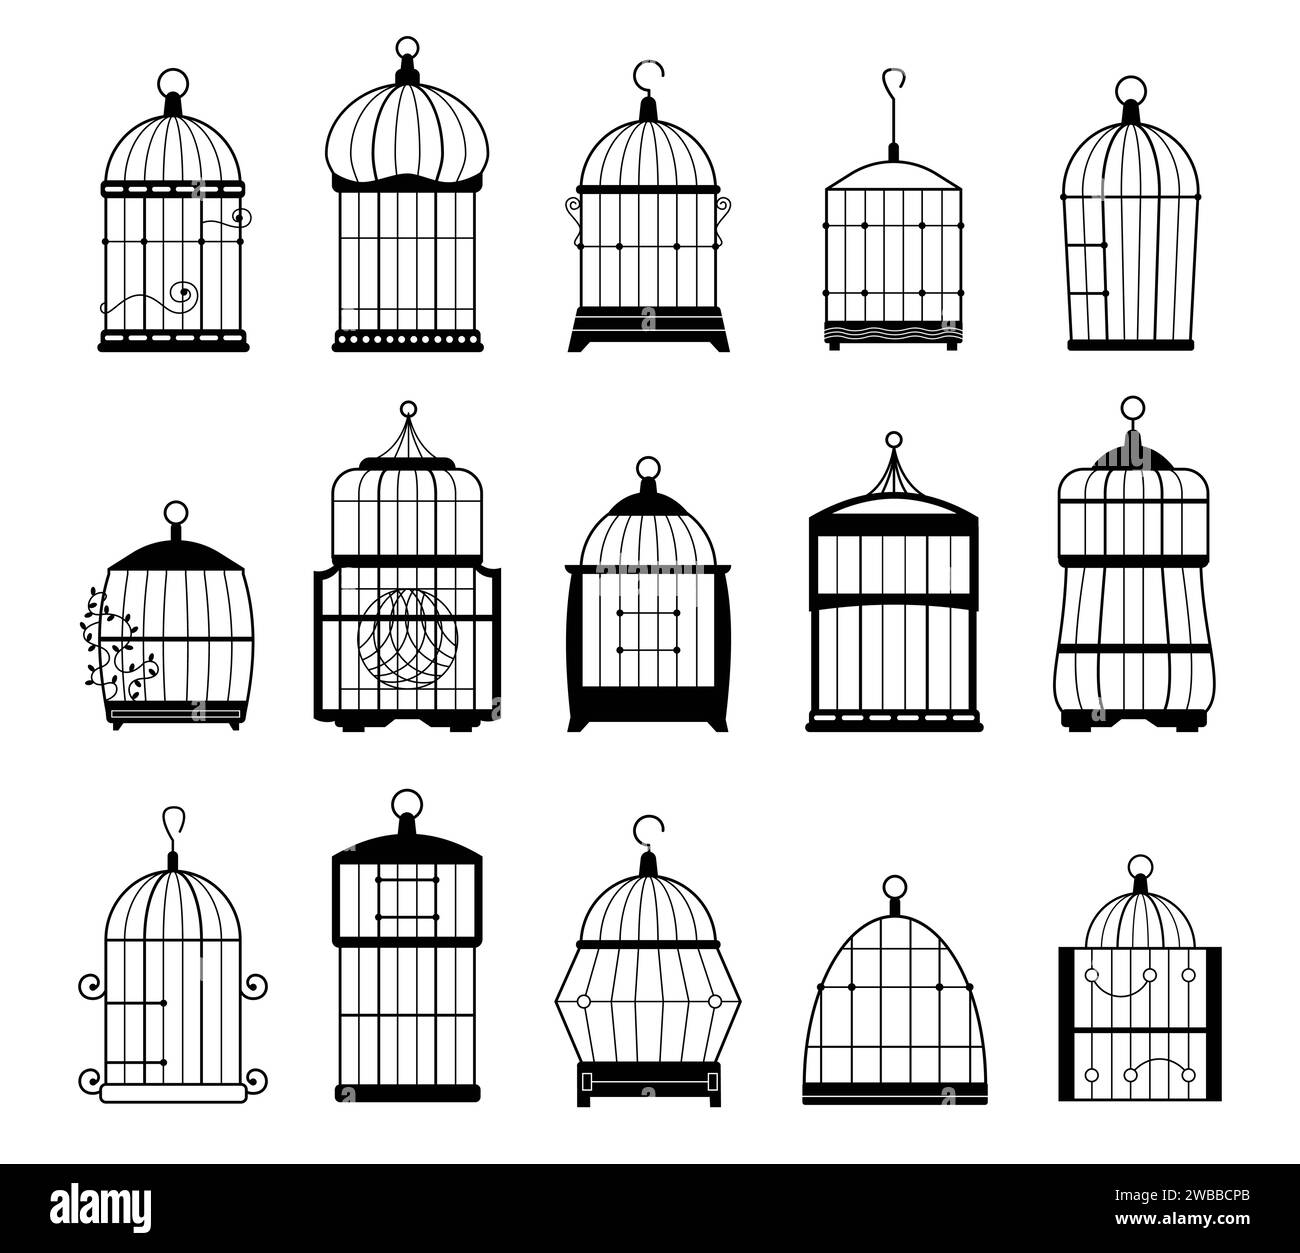 Empty bird cage silhouettes. Cute bird house for different types of ...